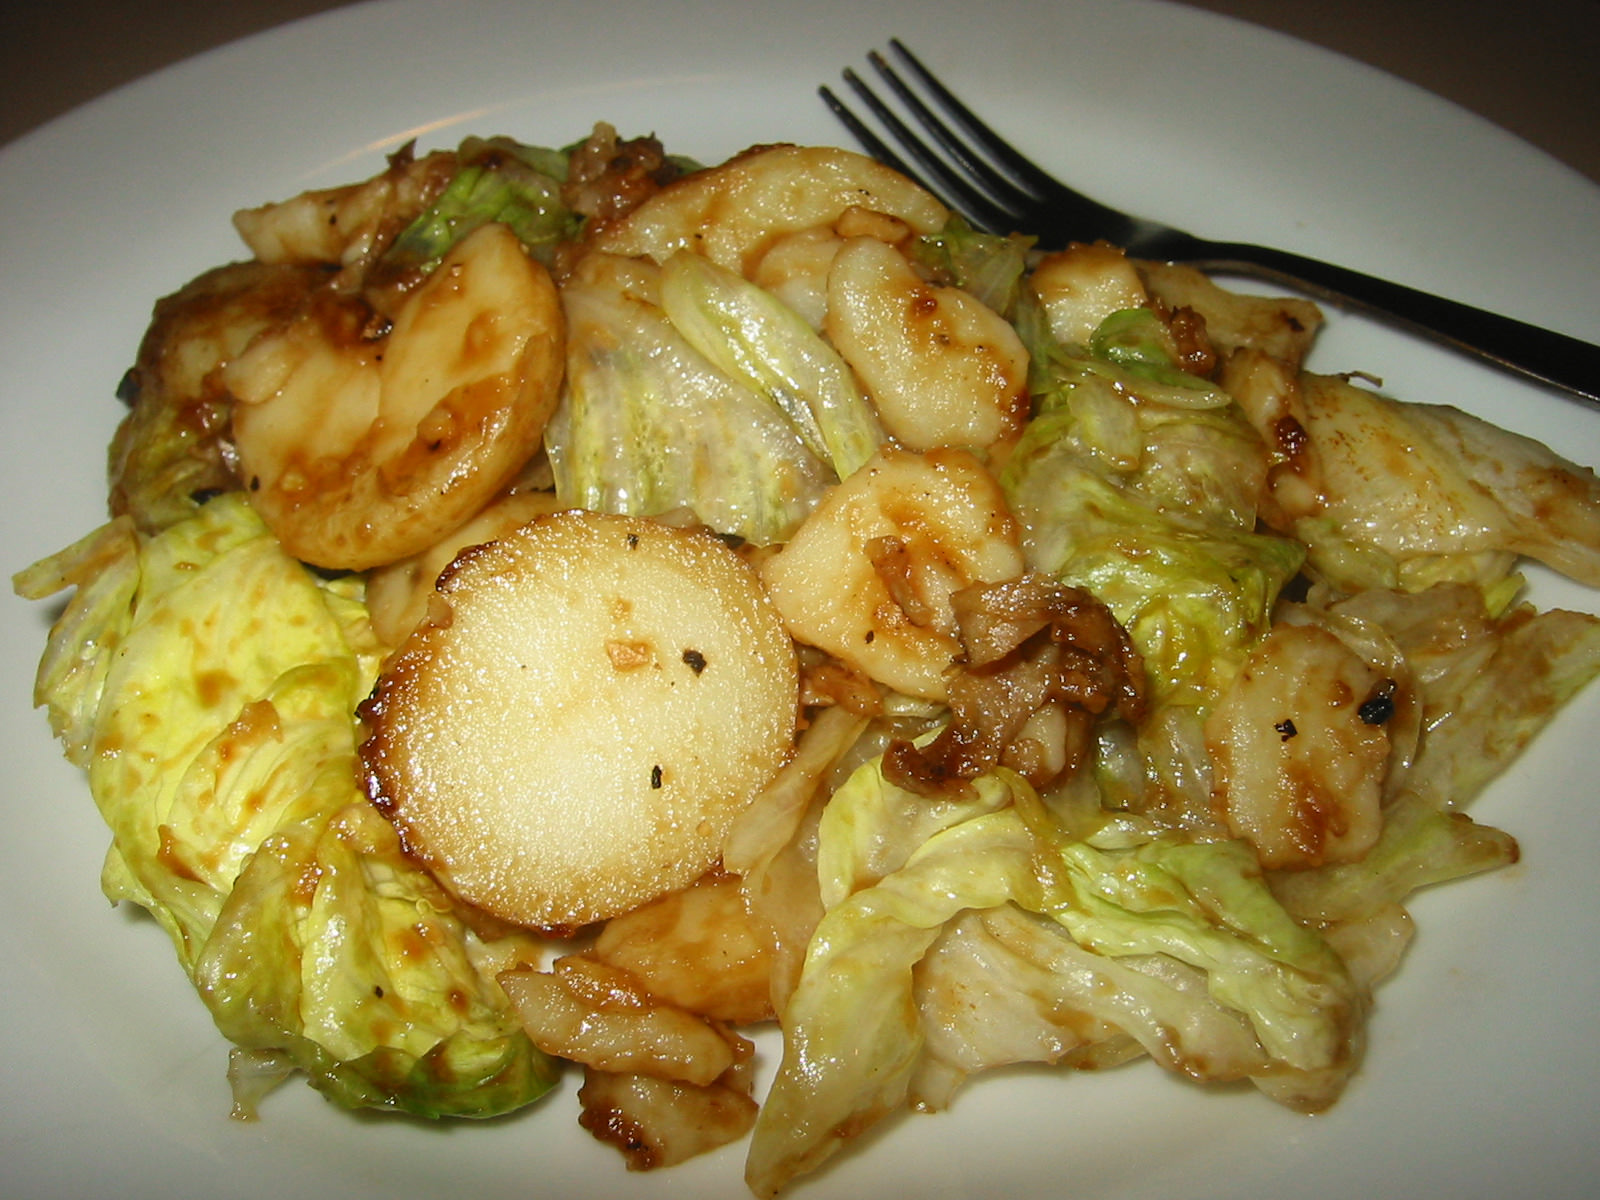 Stir-fried potatoes and lettuce with oyster sauce and garlic